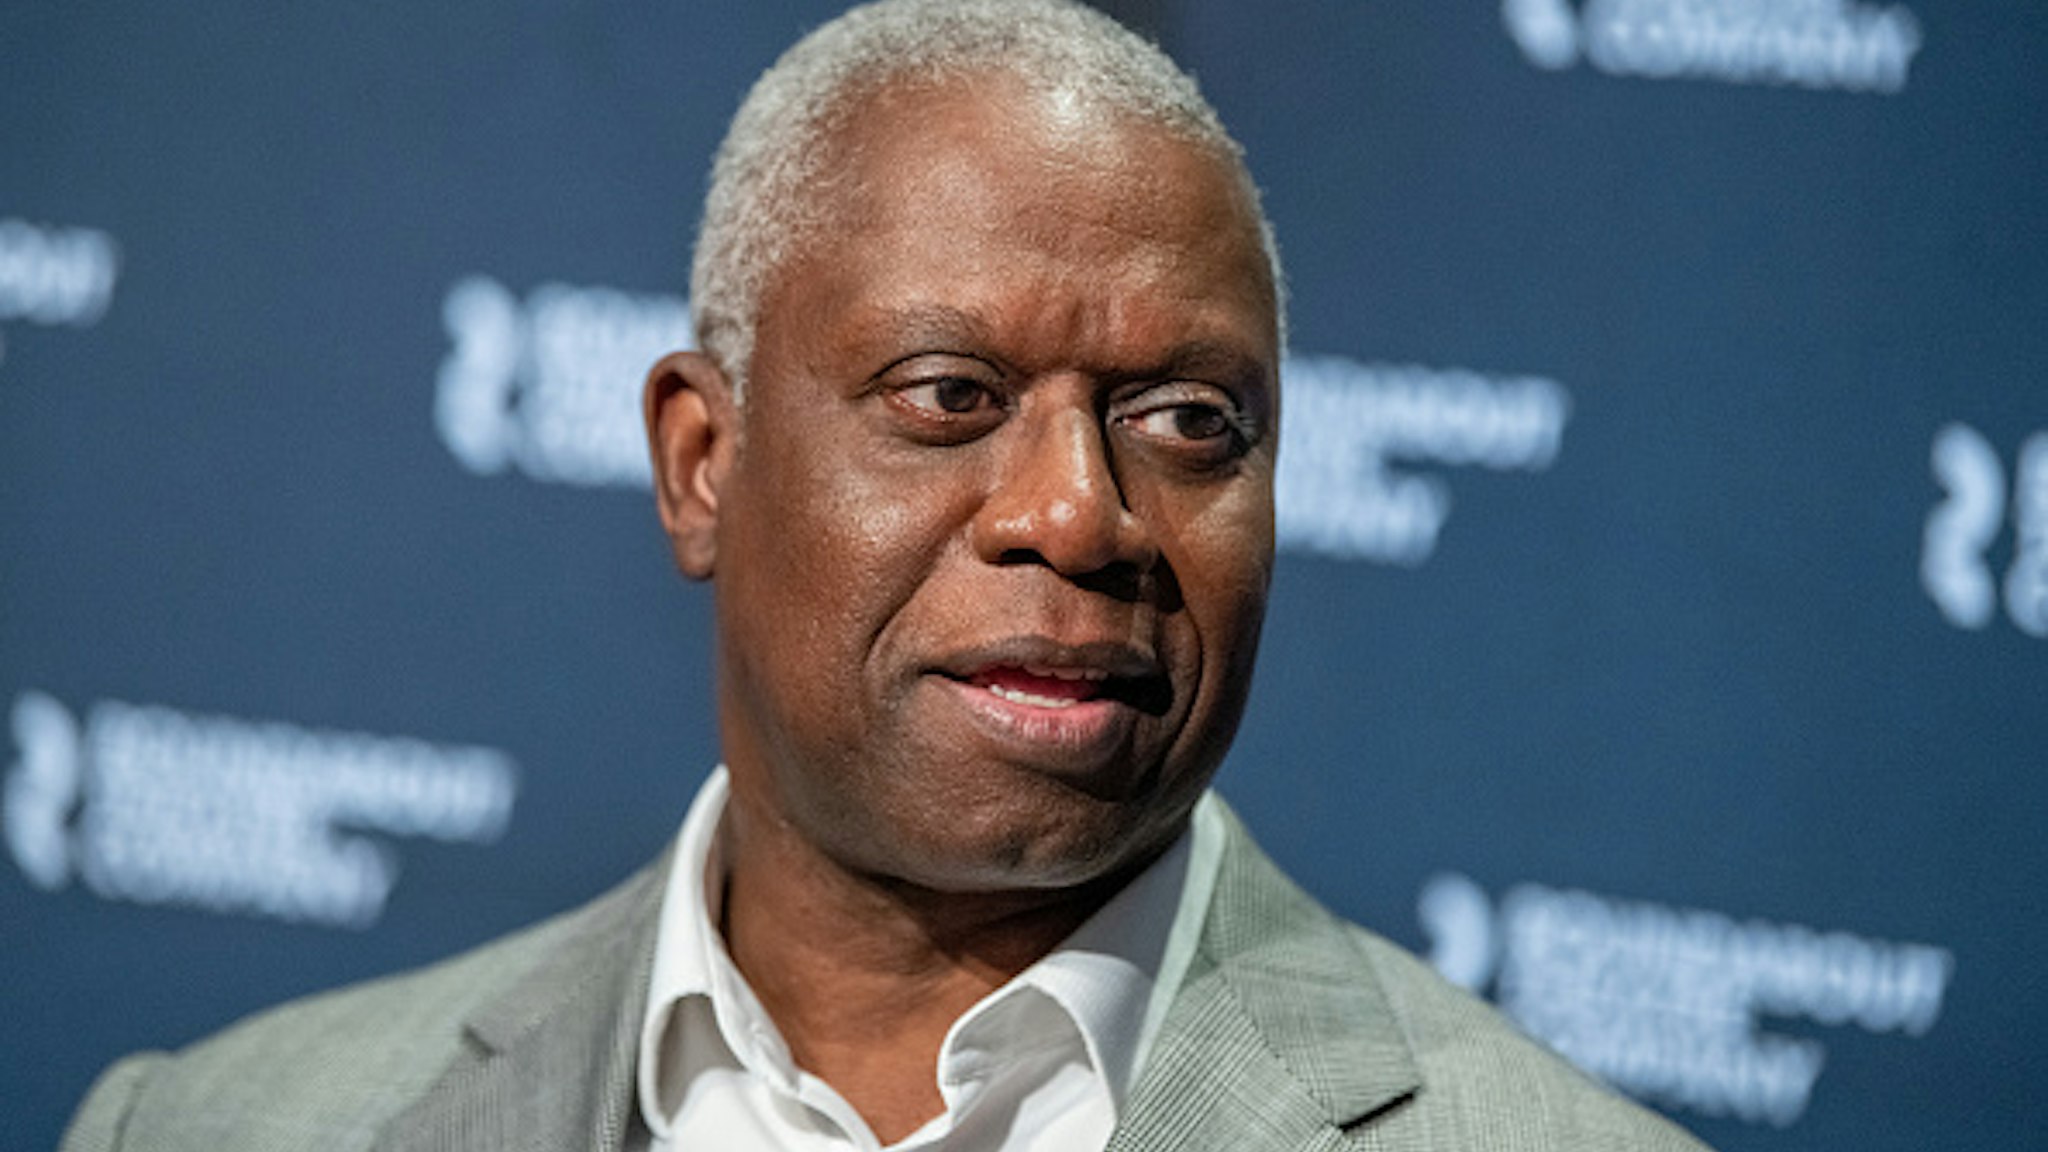 NEW YORK, NEW YORK - MARCH 12: Andre Braugher attends the "Birthday Candles" Photocall at American Airlines Theatre on March 12, 2020 in New York City.